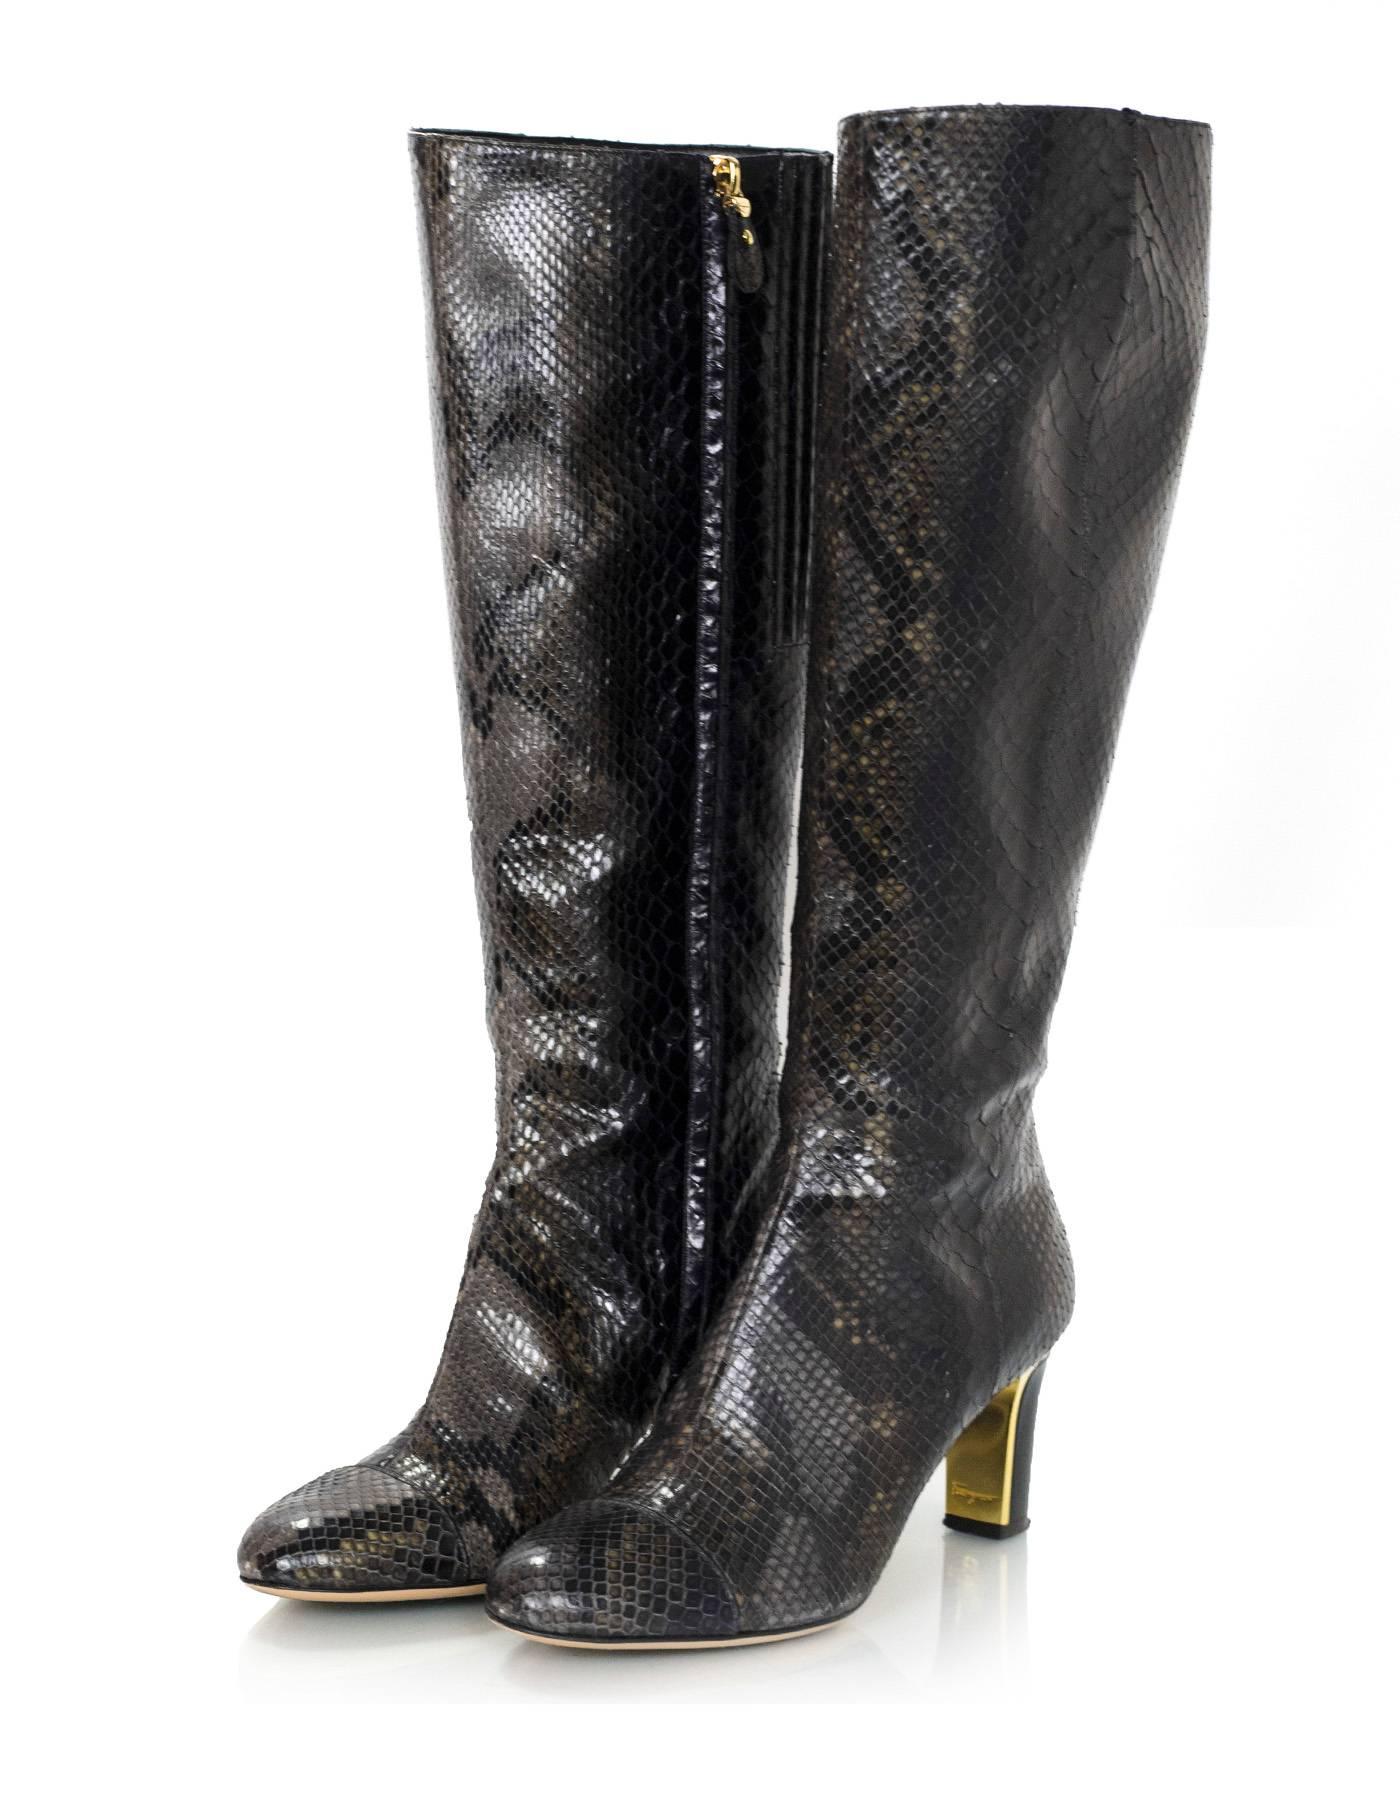 Salvatore Ferragamo Grey Python Snakeskin Boots Sz 8B In Excellent Condition In New York, NY